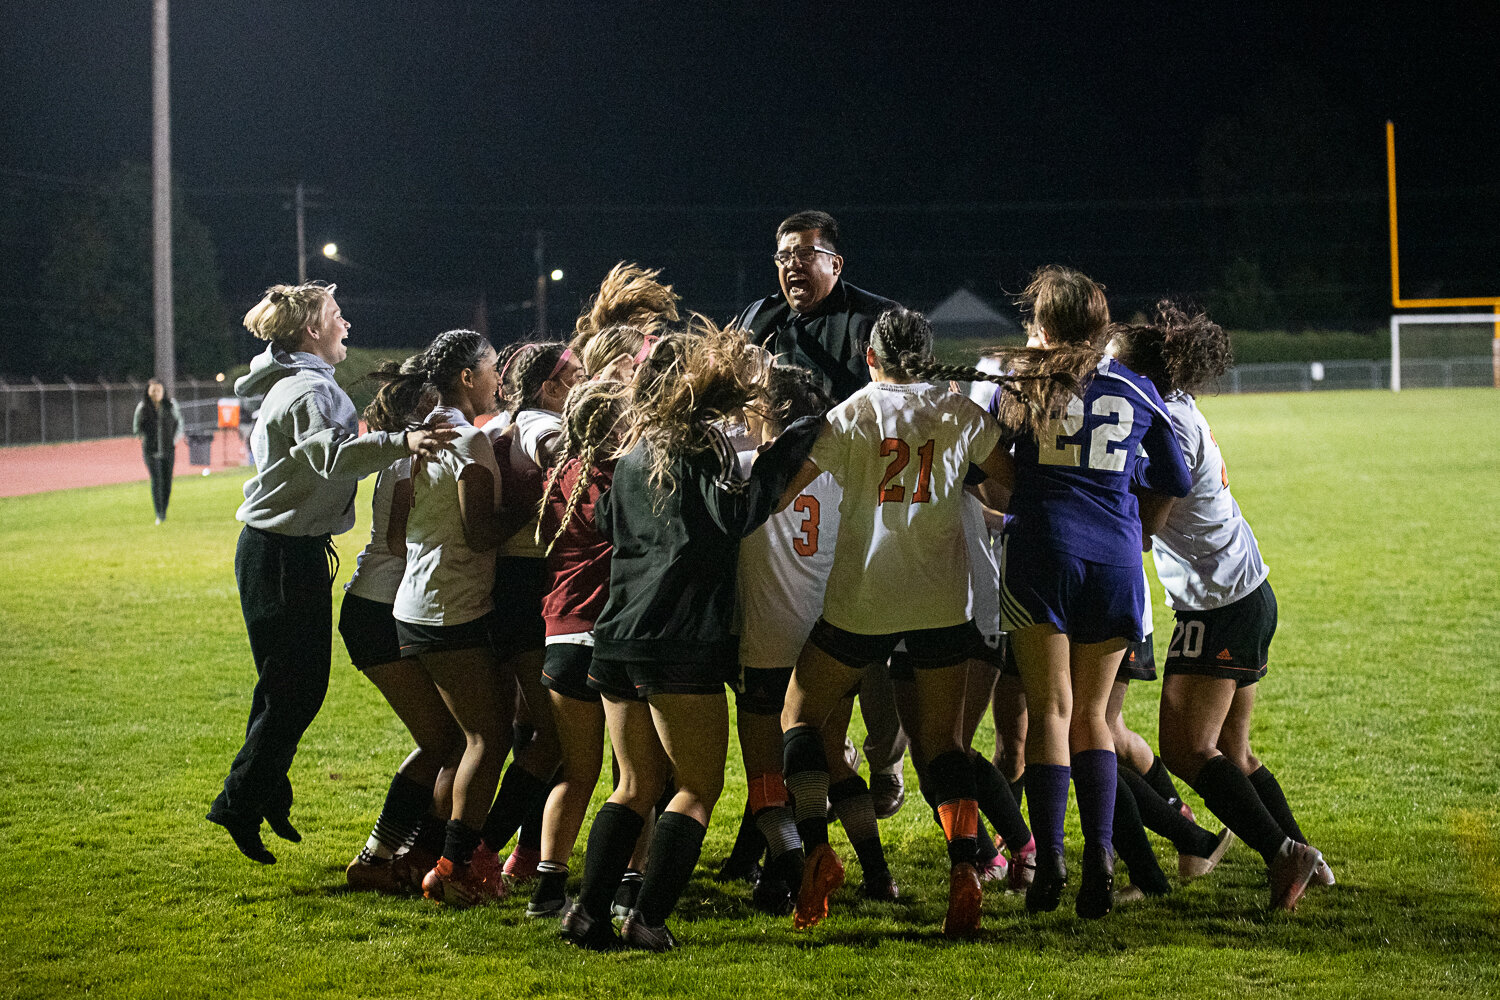 Coach Luis Magana Reyna and the Tigers celebrate after defeating W.F. West in a shootout on Sept. 21.